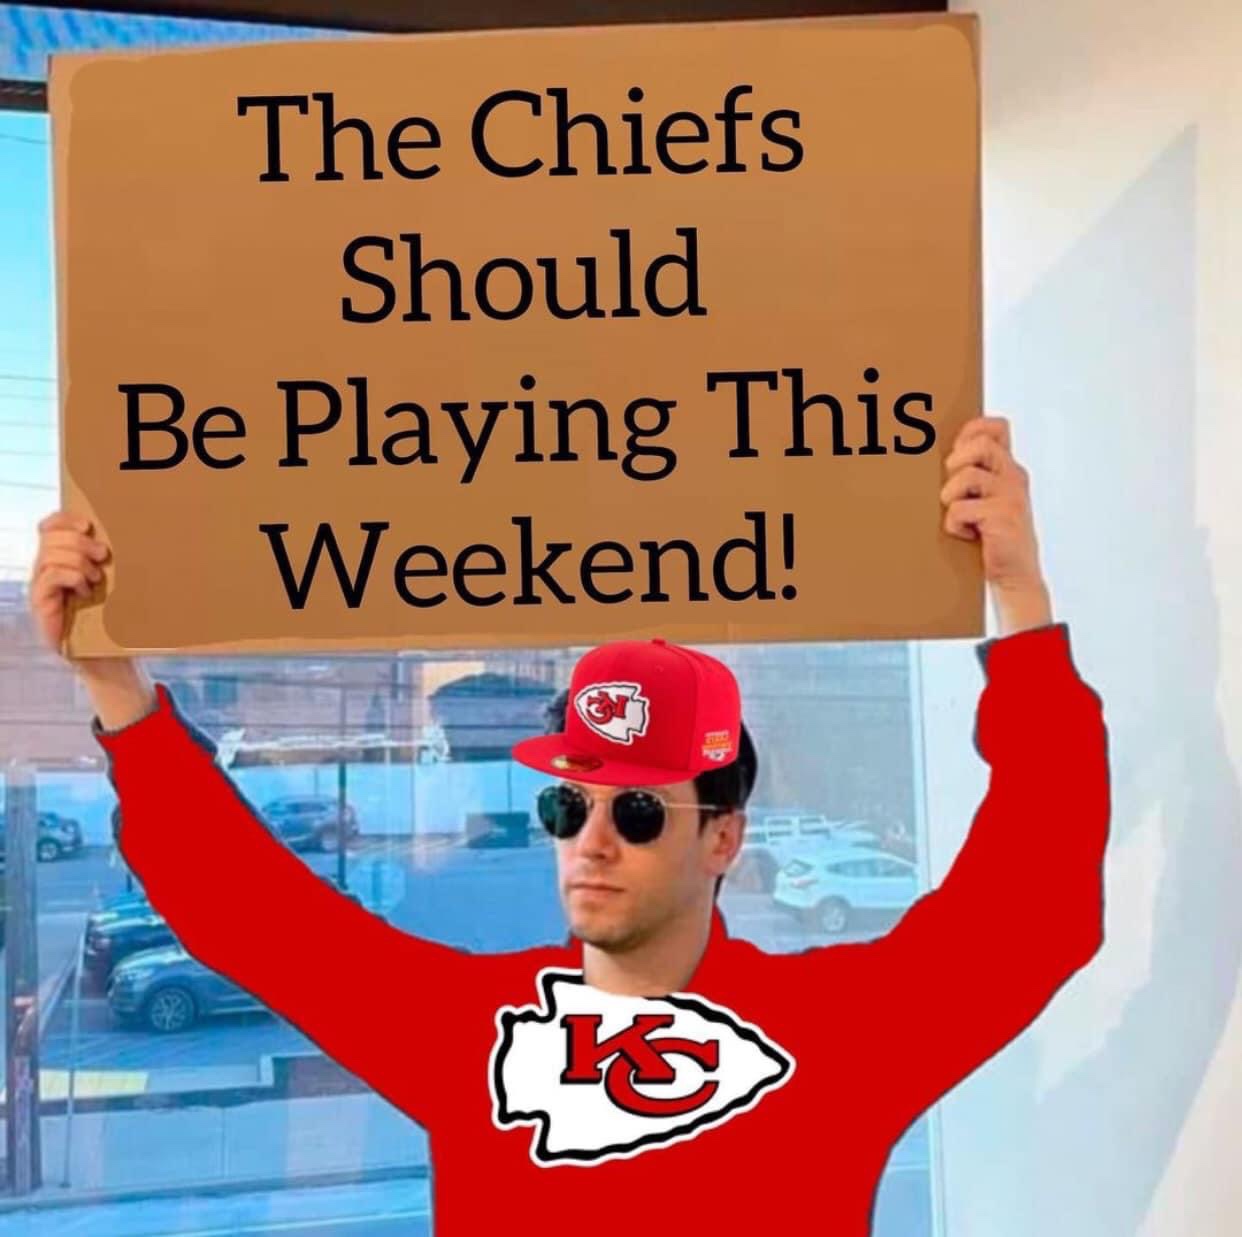 The Chifs should be playing this weekend Super Bowl meme